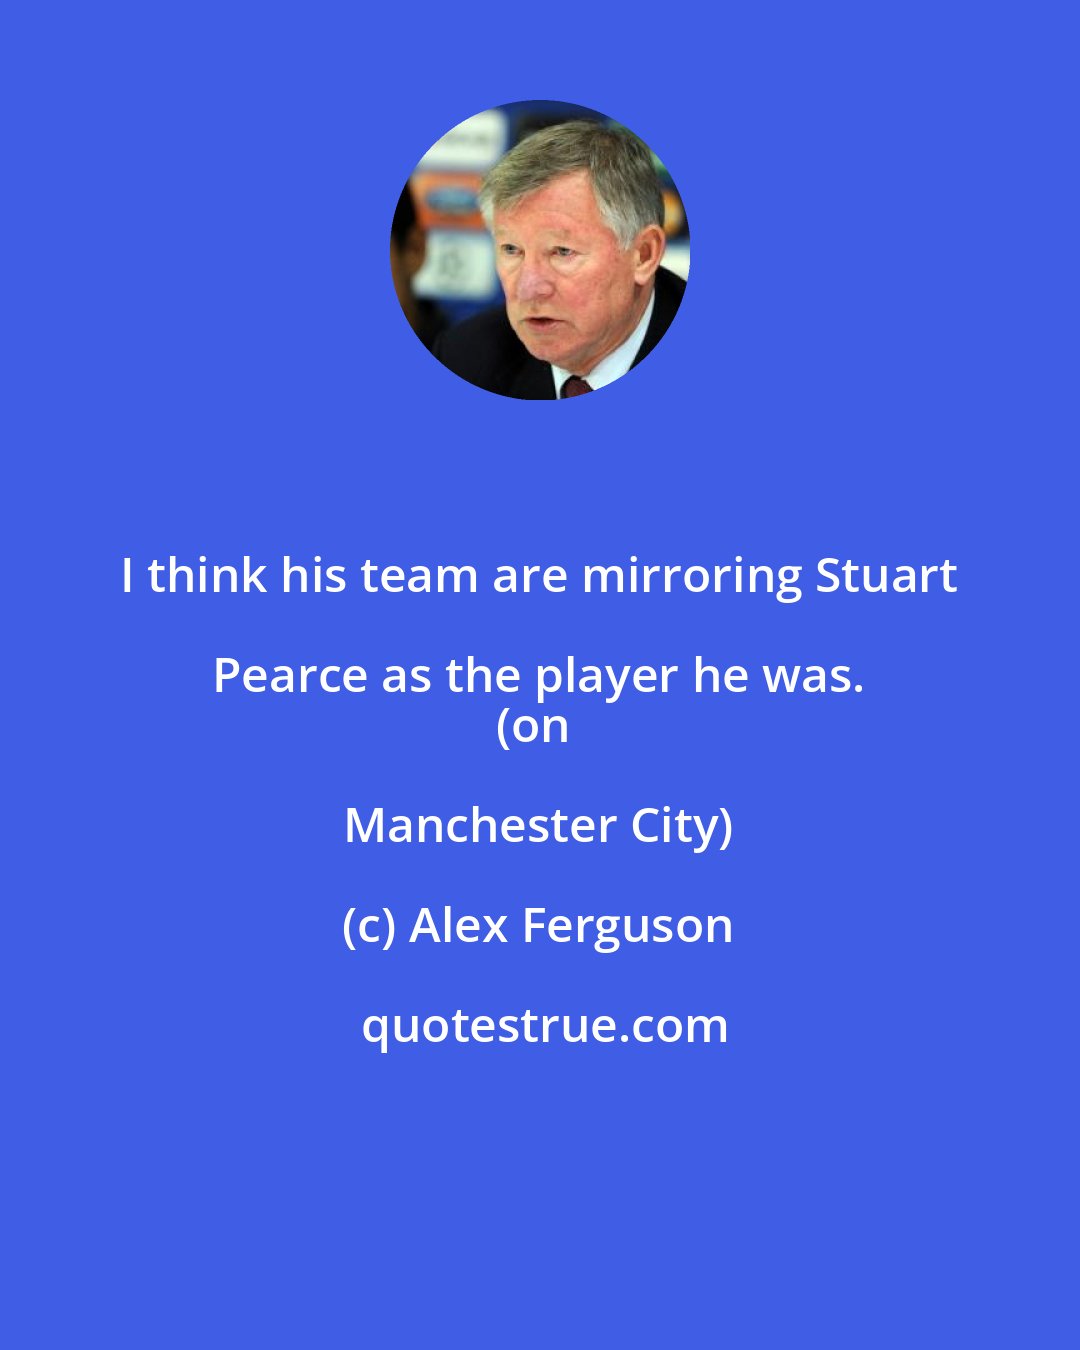 Alex Ferguson: I think his team are mirroring Stuart Pearce as the player he was. 
(on Manchester City)